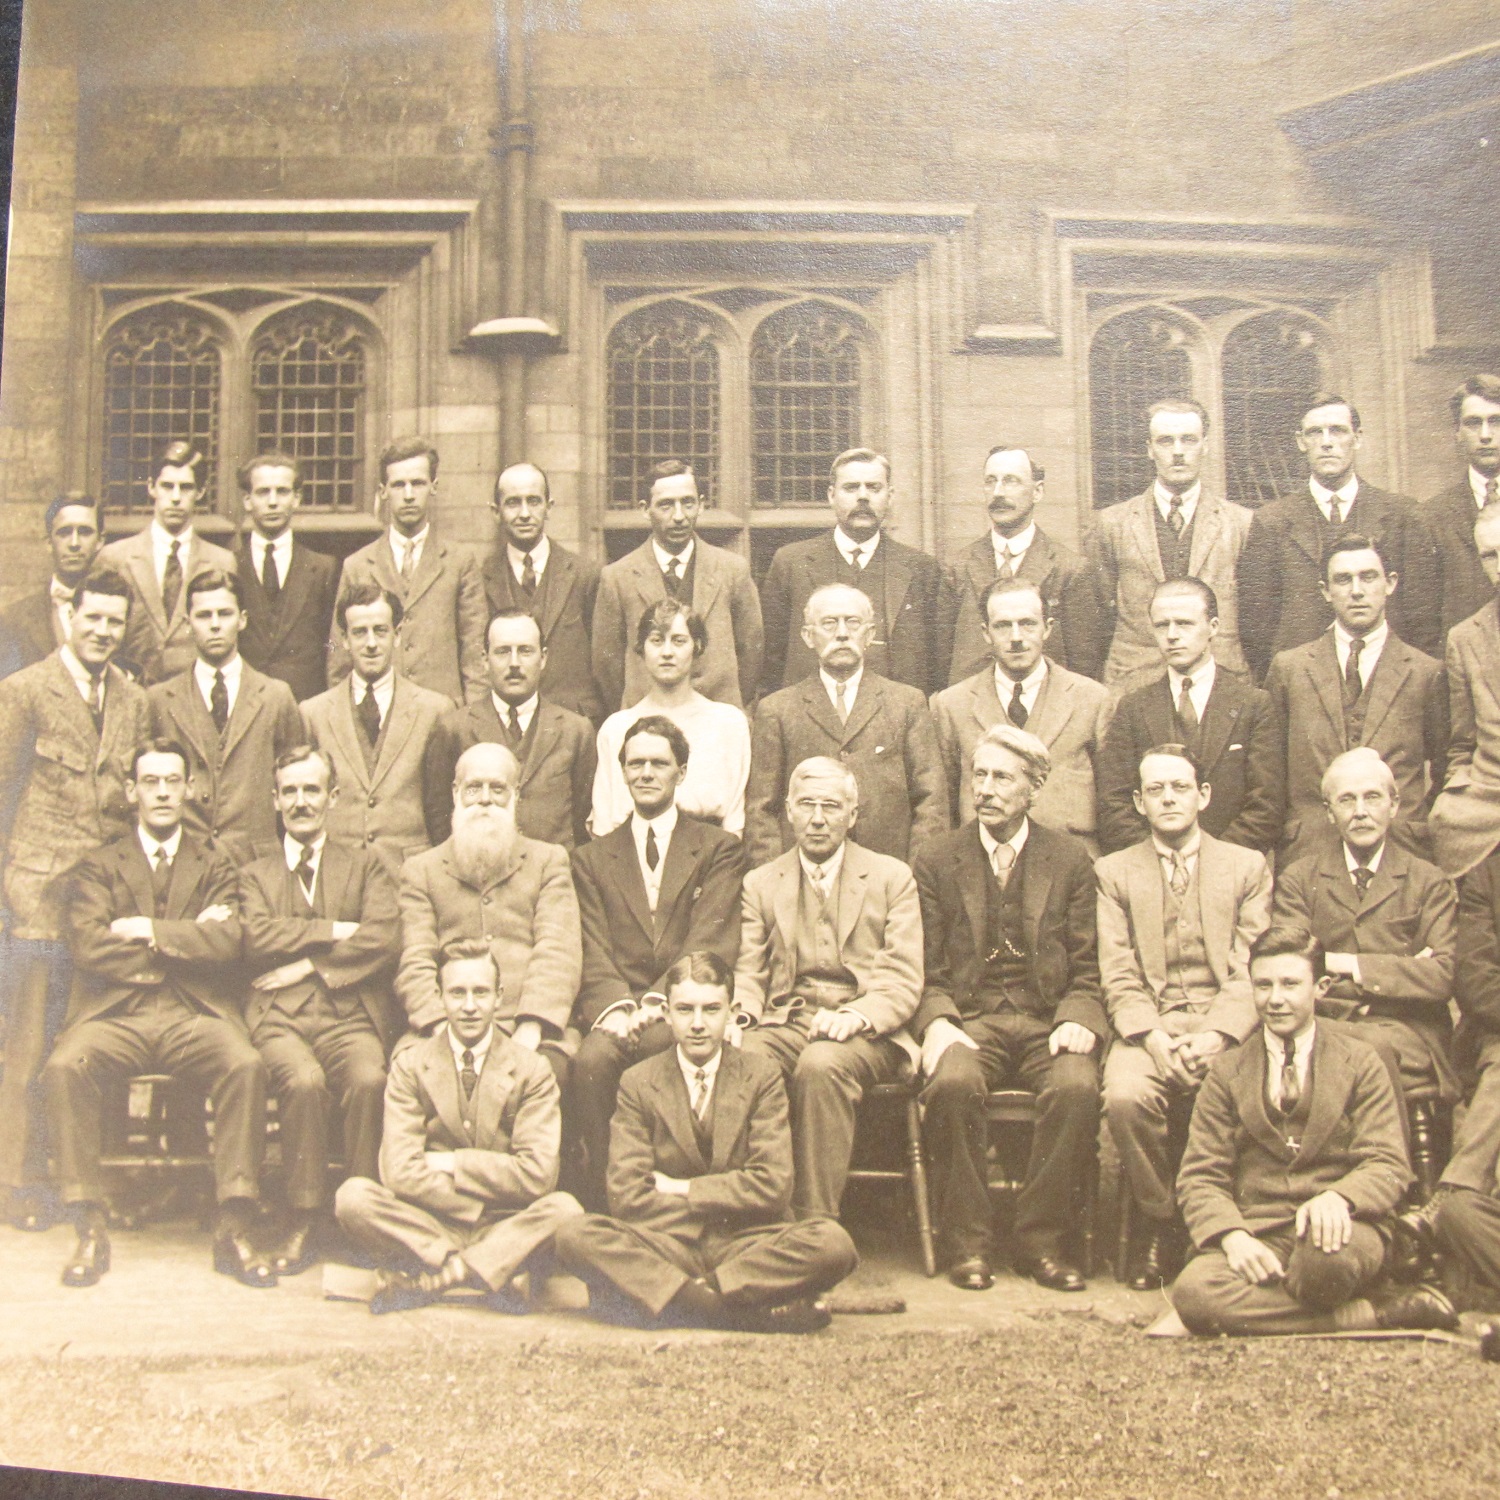 Formal staff photograph taken in one of the Library courtyards, 1923